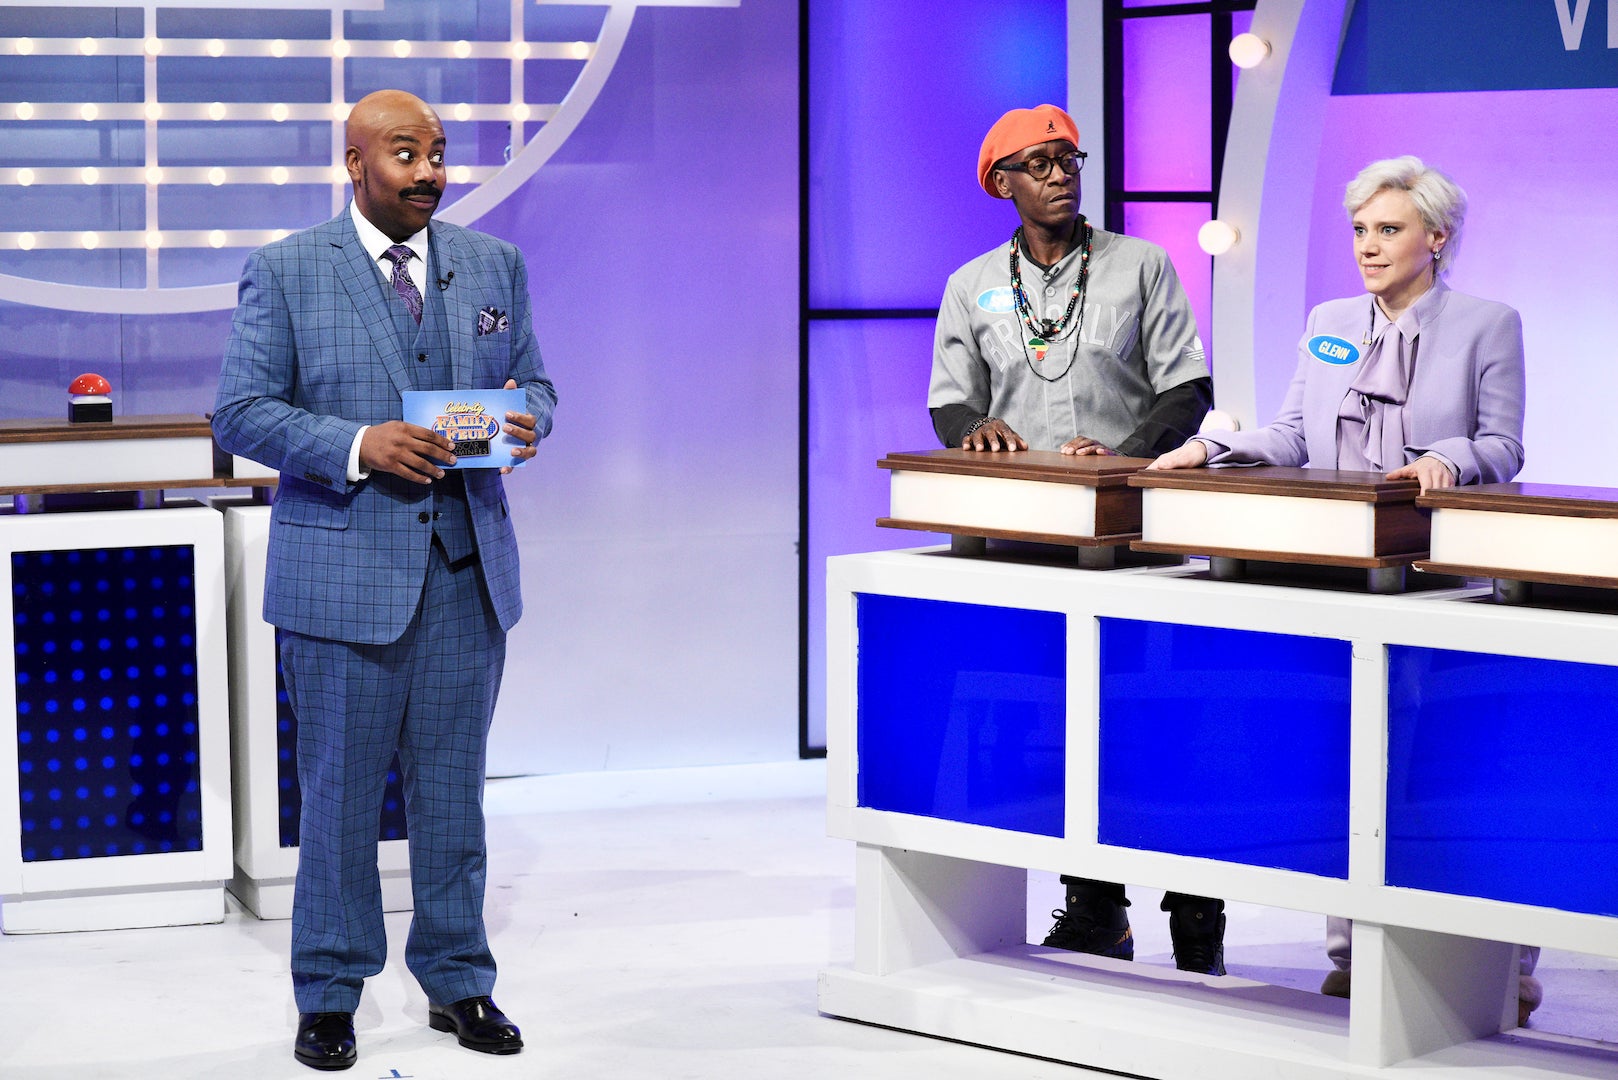 Steve Harvey Told Kenan Thompson To 'Watch Yourself' Over 'SNL' Impression, But It Was All Love